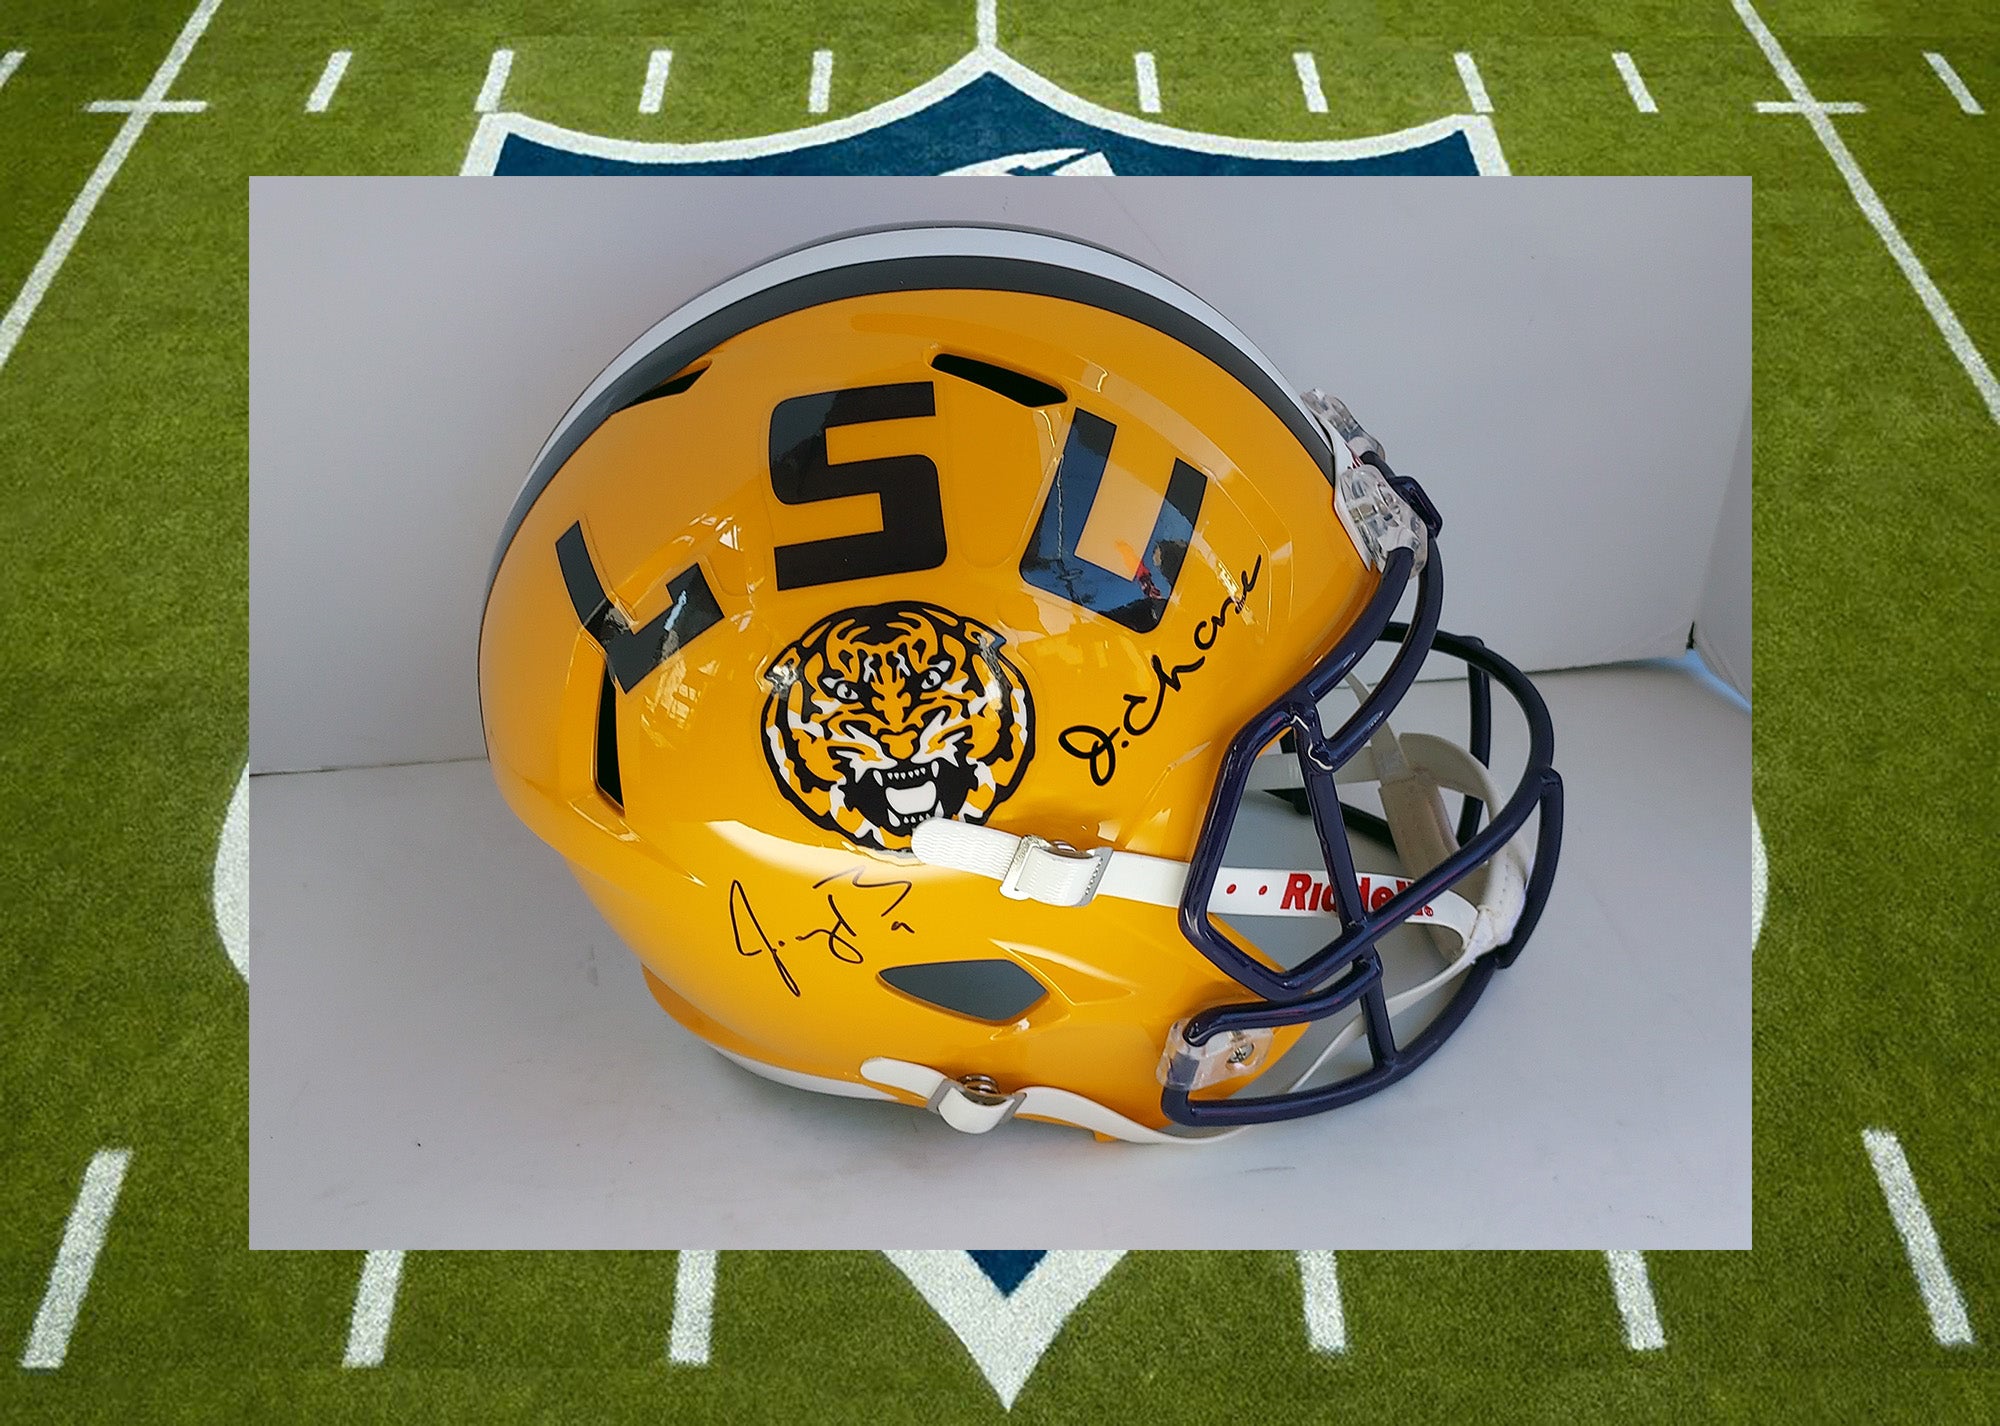 LSU Jamarr Chase, Joe Burrow Speed full size replica helmet signed with proof